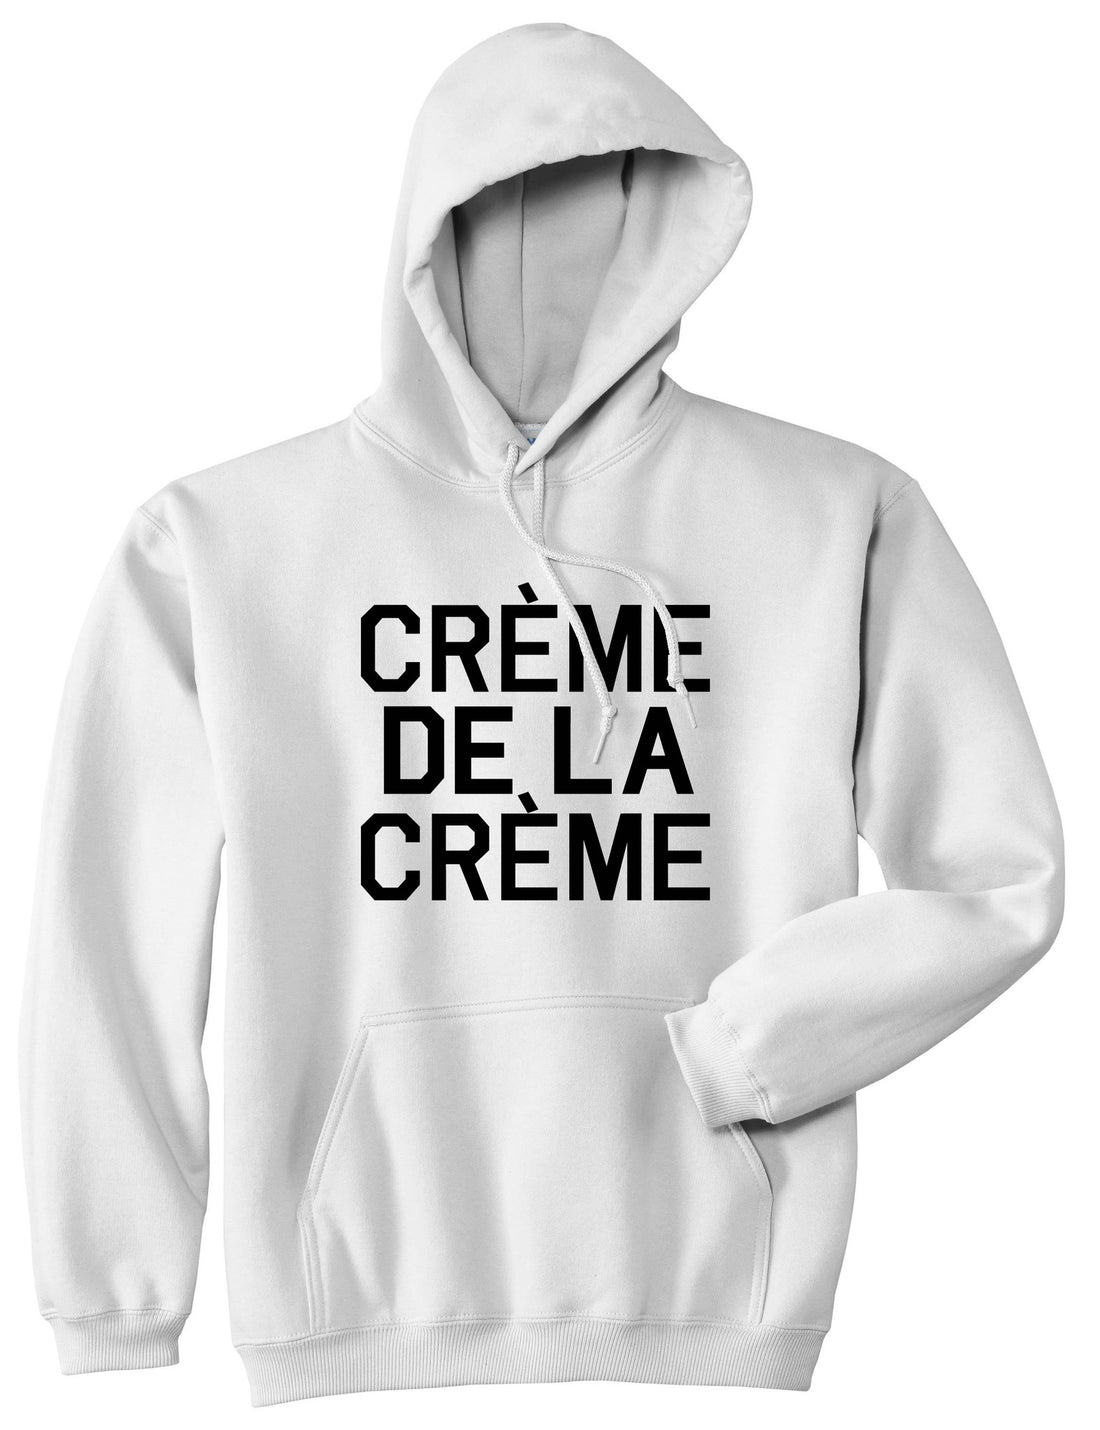 Creme De La Creme Celebrity Fashion Crop Pullover Hoodie Hoody in White by Kings Of NY